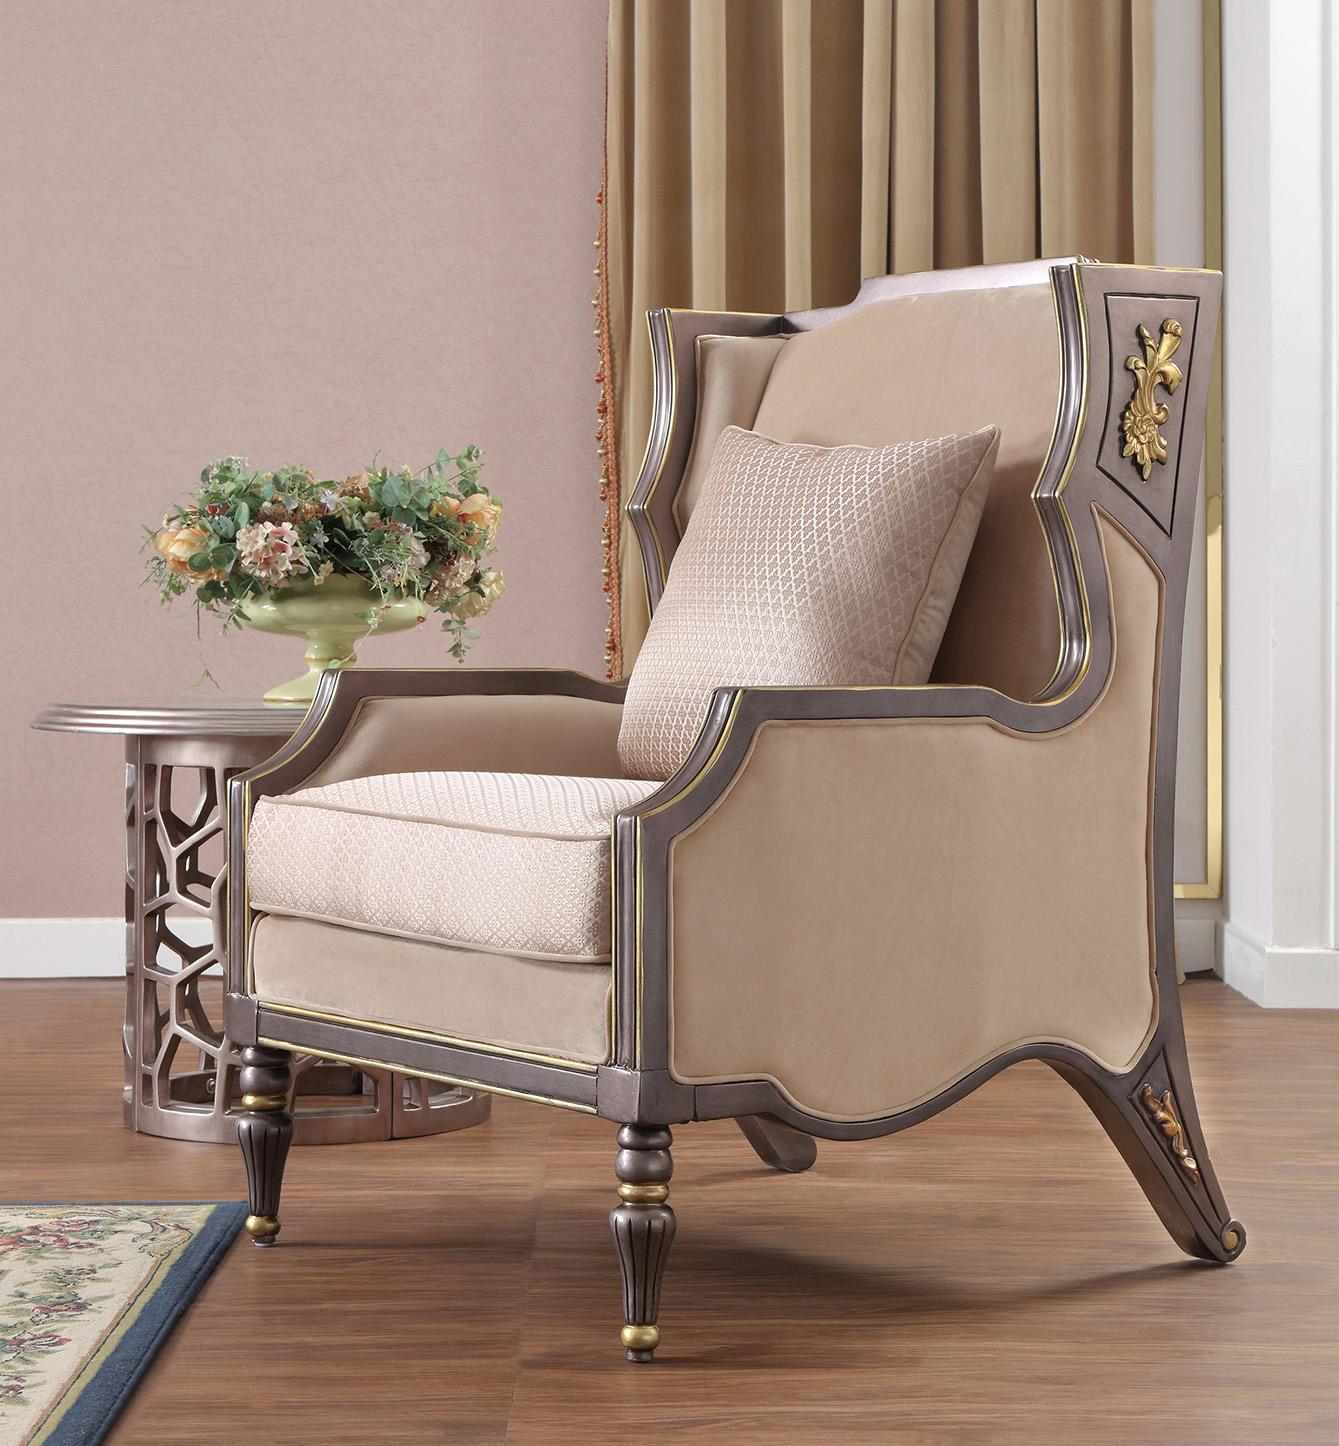 Traditional Arm Chair HD-3058 HD-C3058 in Gold, Beige Fabric